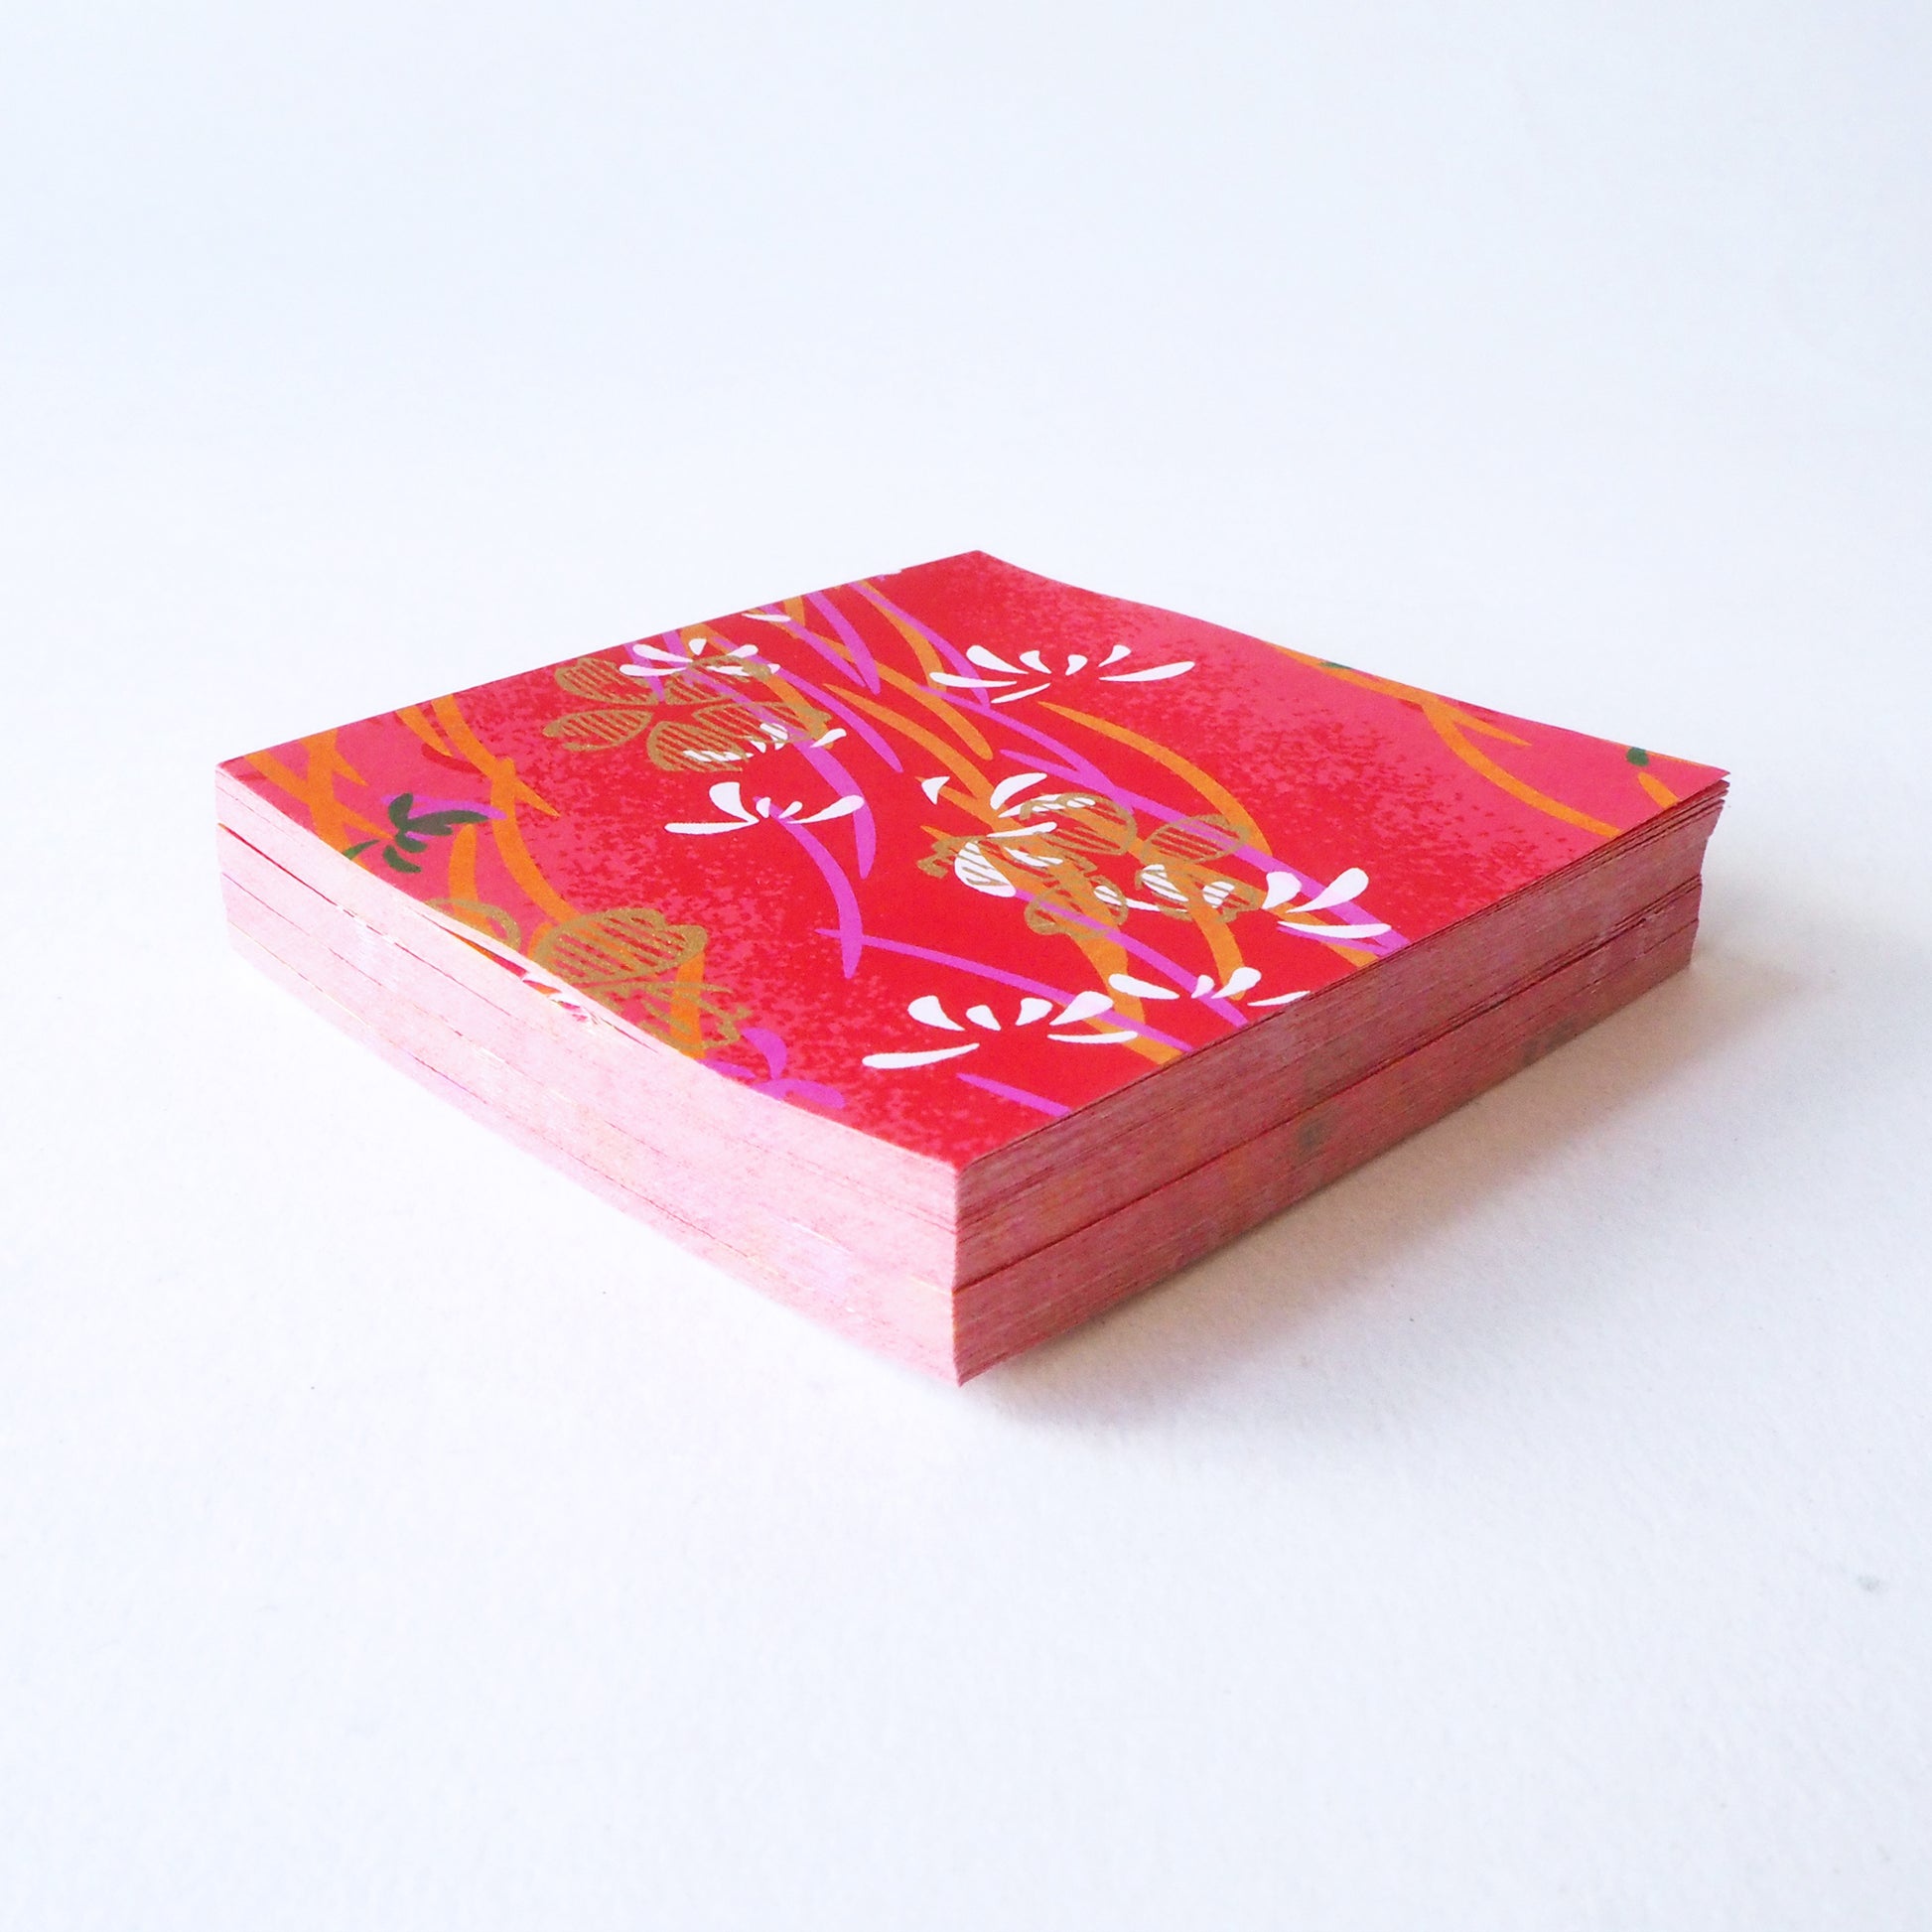 Pack of 100 Sheets 7x7cm Yuzen Washi Origami Paper HZ-083 - Gold Cherry Blossom Red - washi paper - Lavender Home London